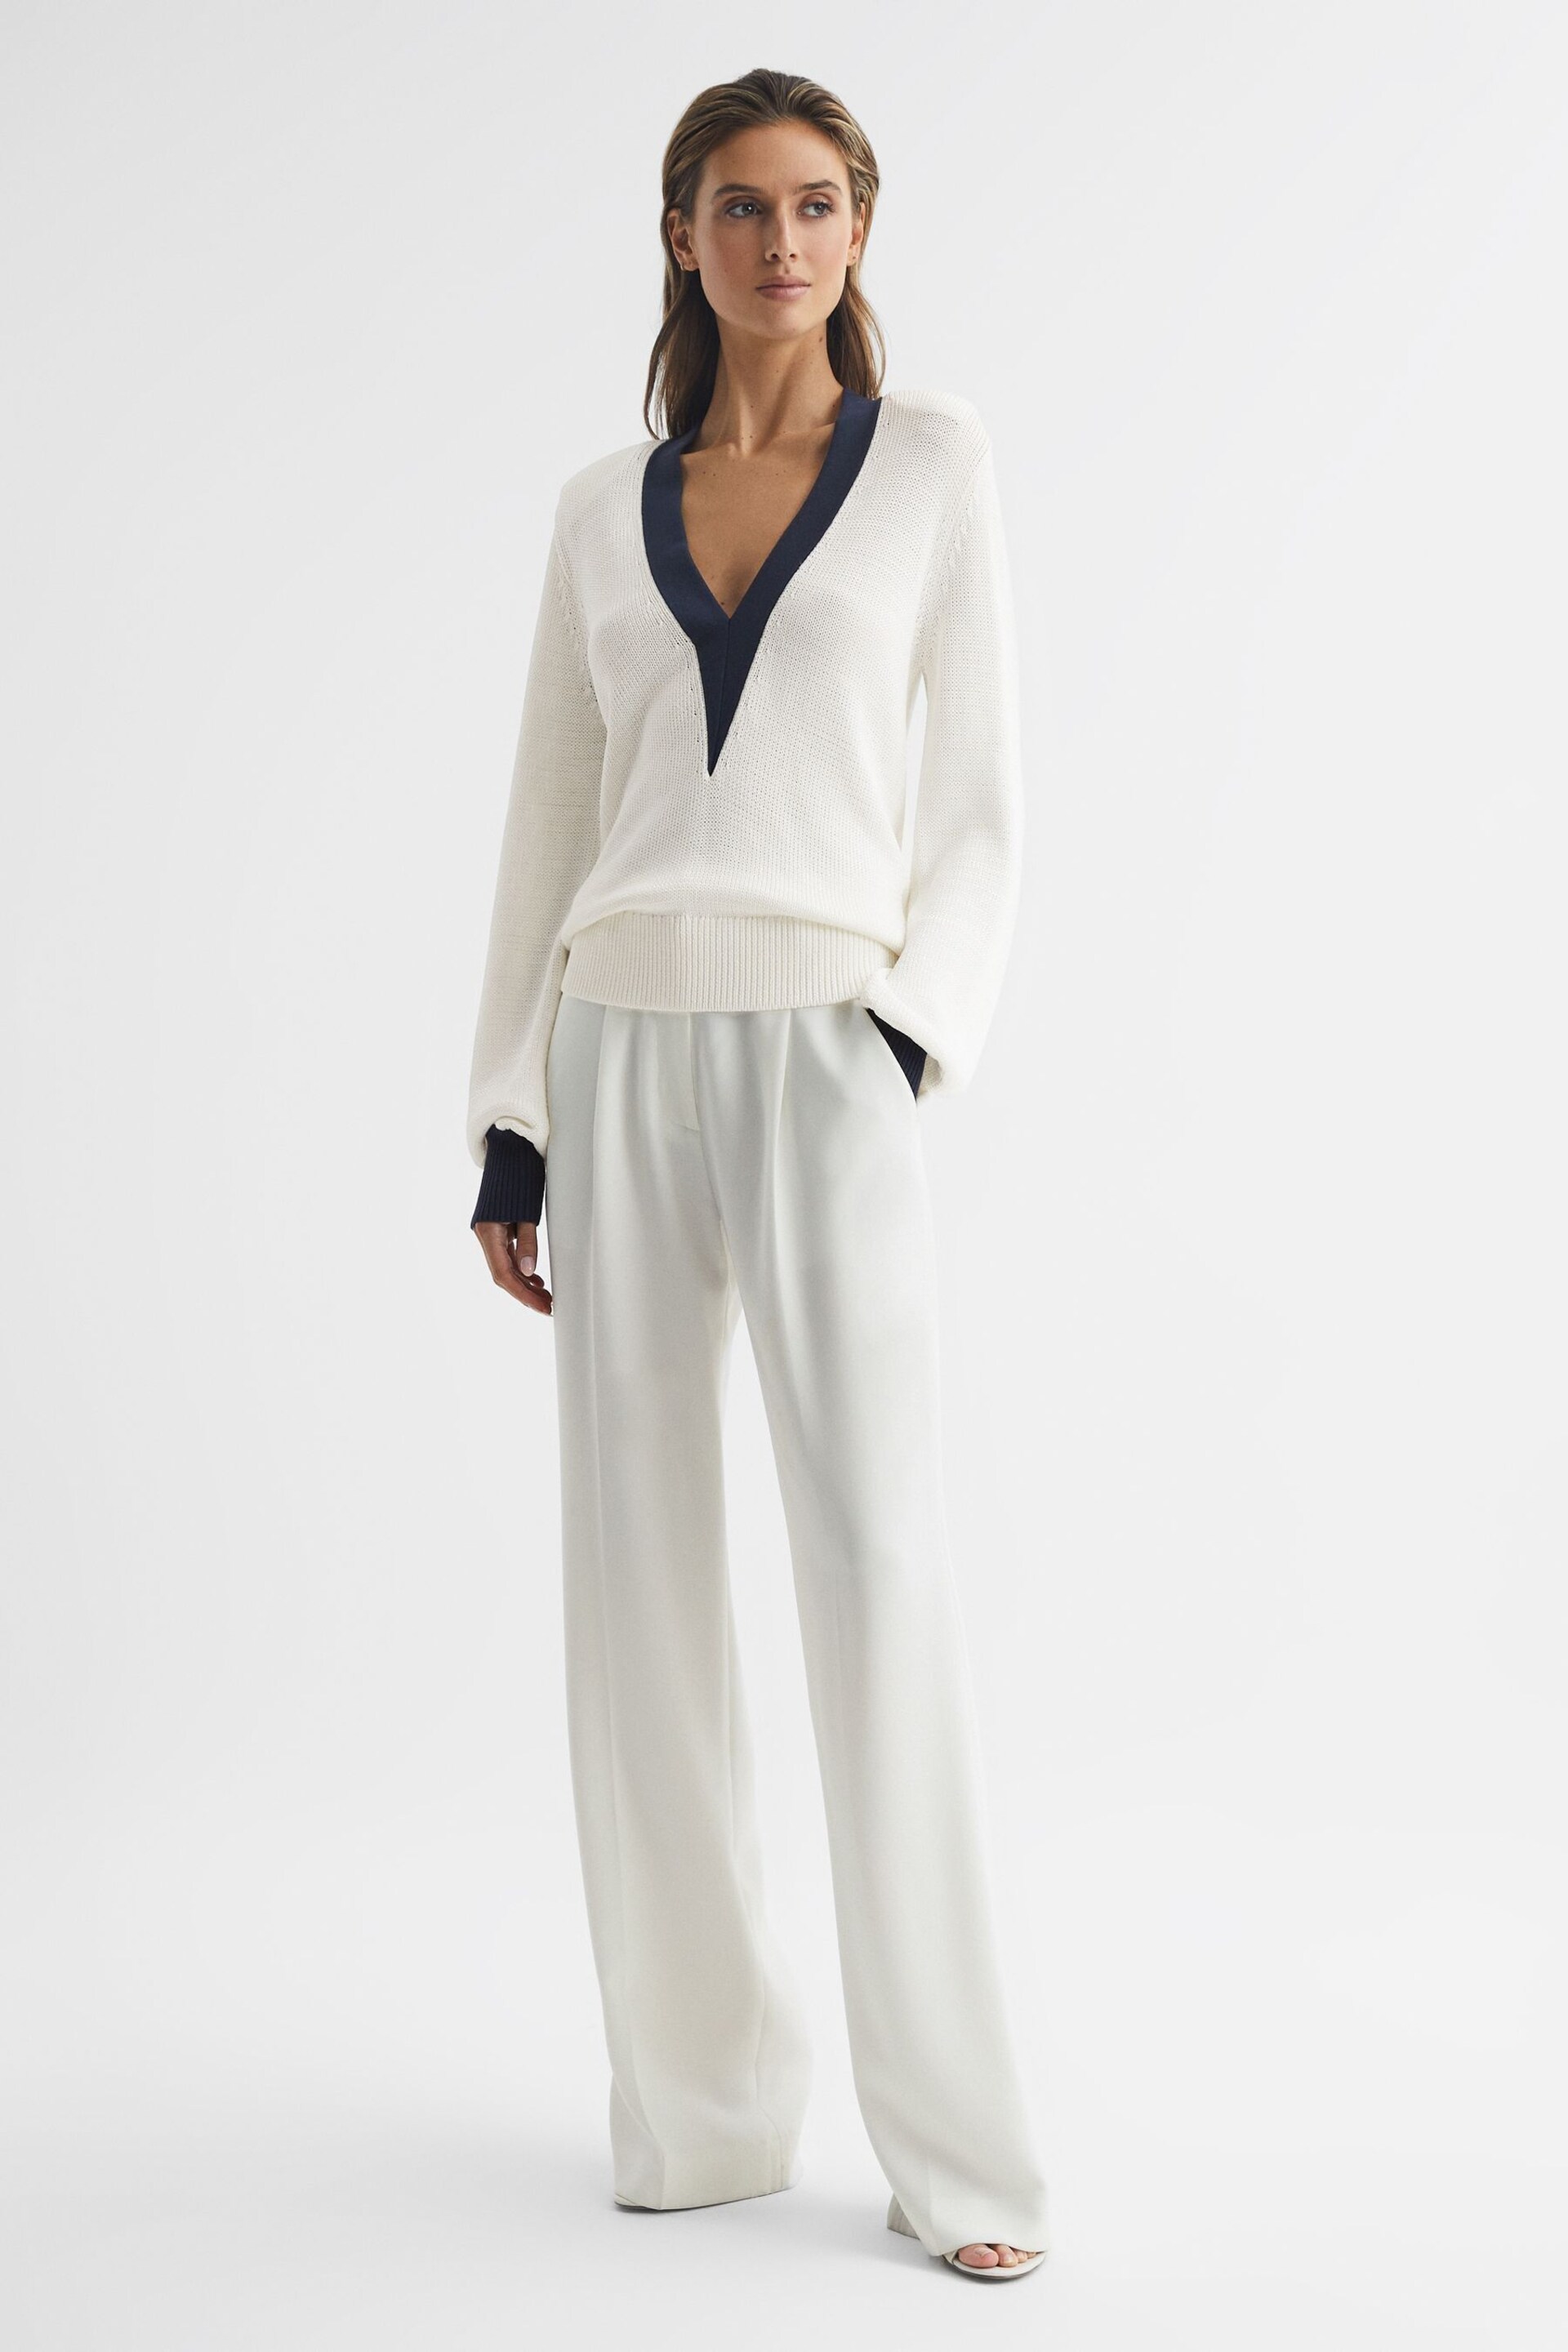 Reiss White/Navy Talitha Contrast Trim Knitted Jumper - Image 3 of 6